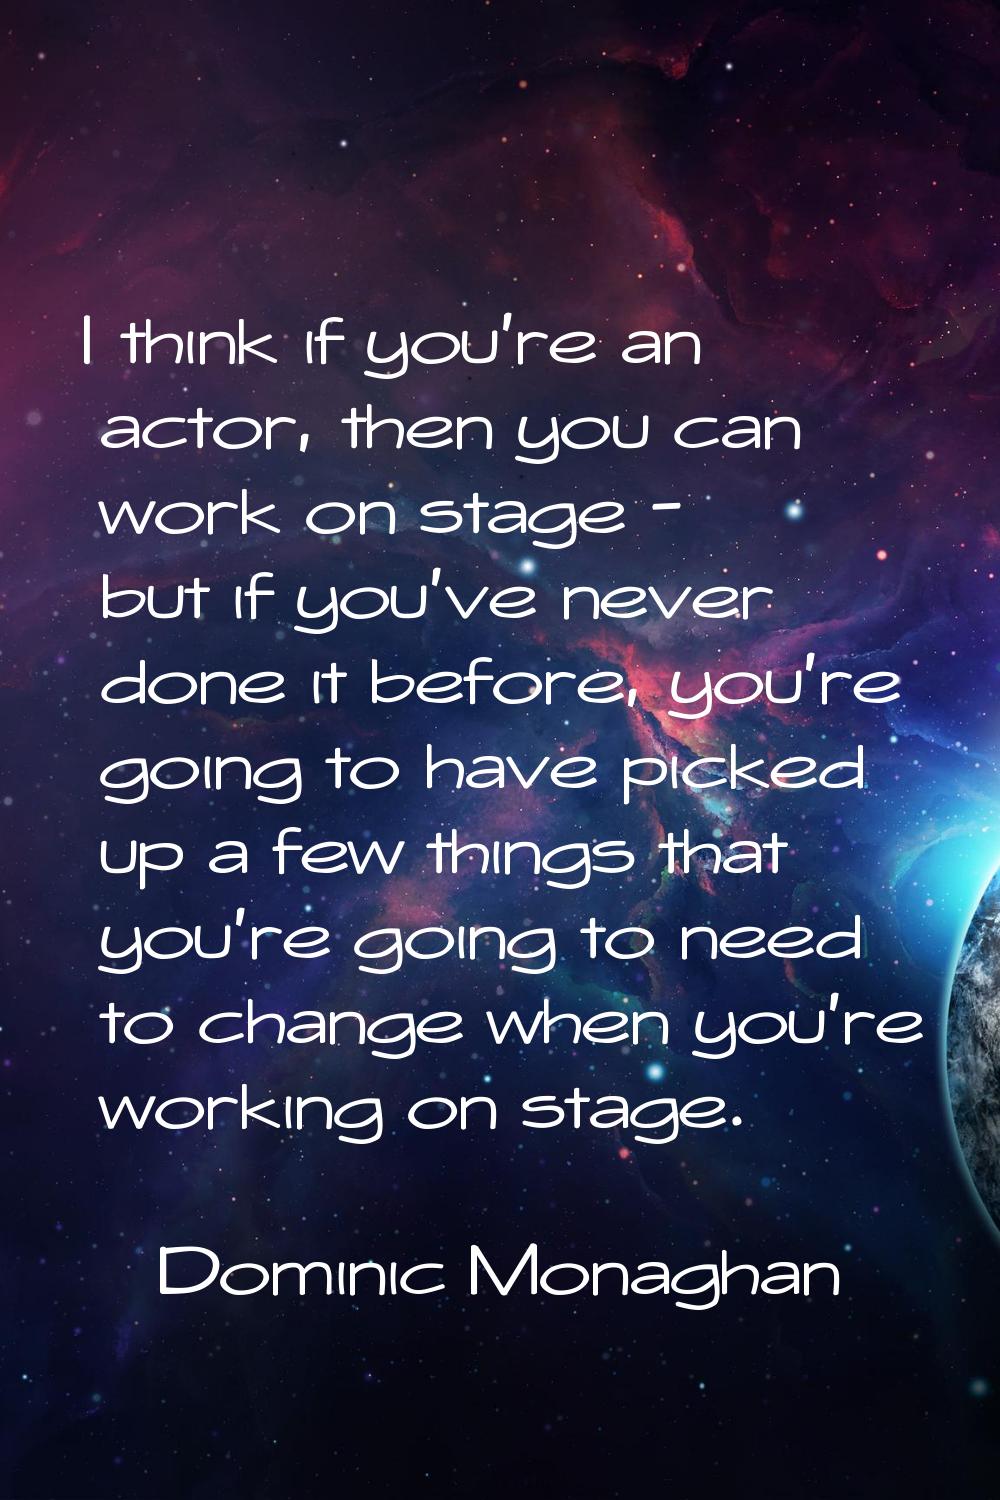 I think if you're an actor, then you can work on stage - but if you've never done it before, you're